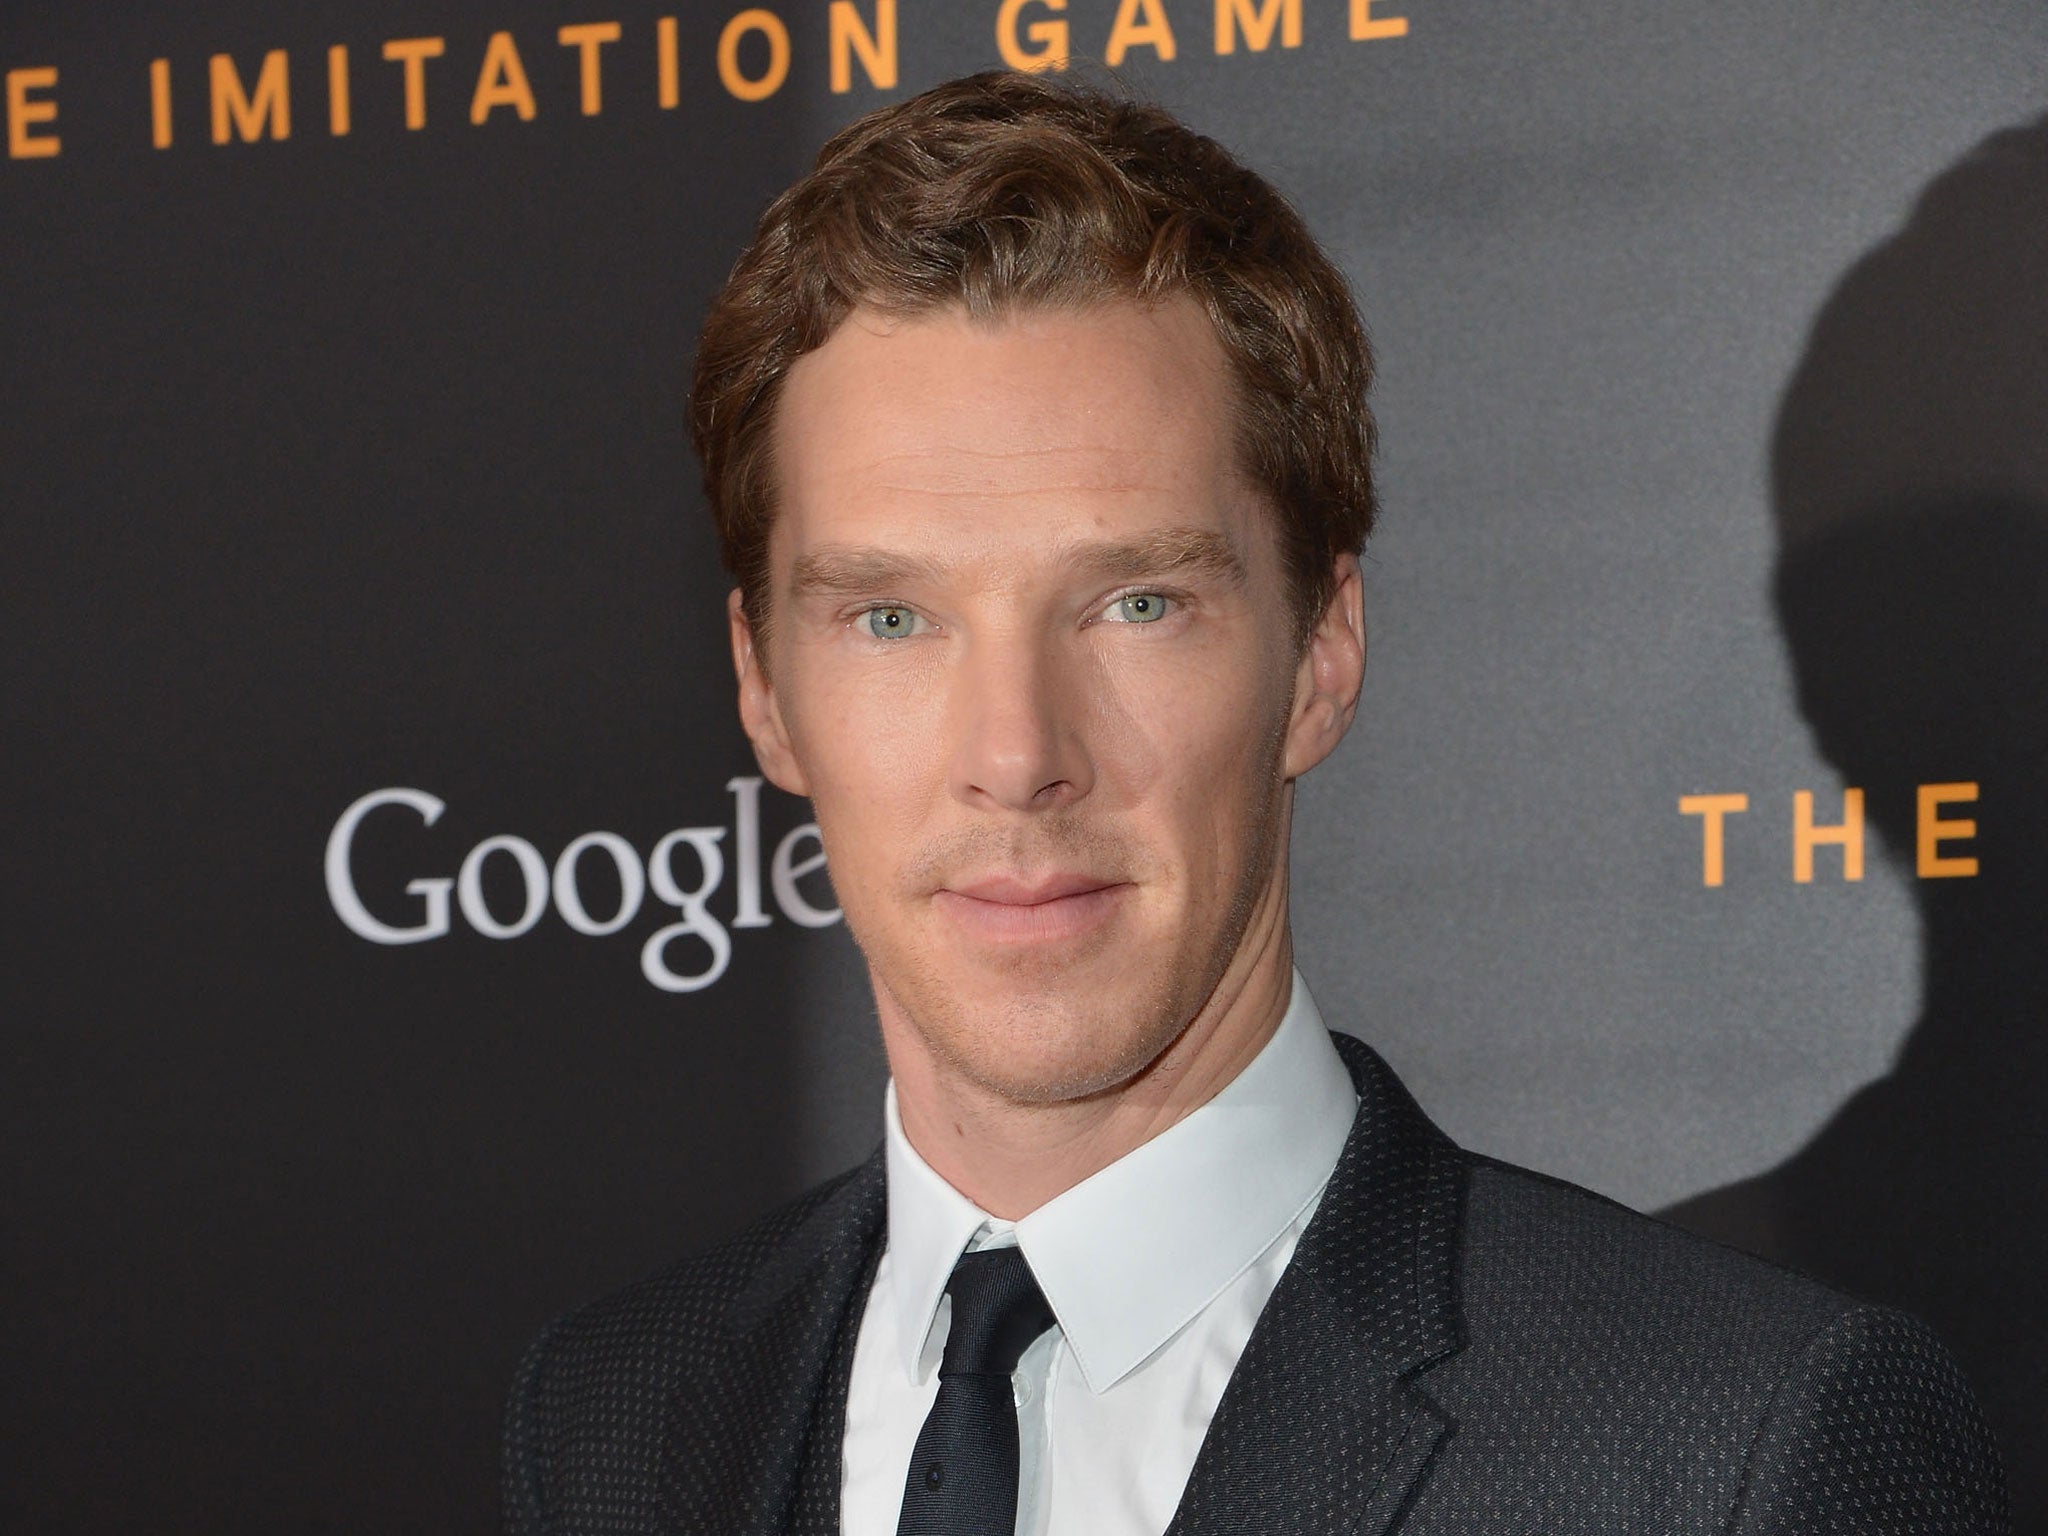 Benedict Cumberbatch has spoken about the lack of opportunities for black British actors in the UK